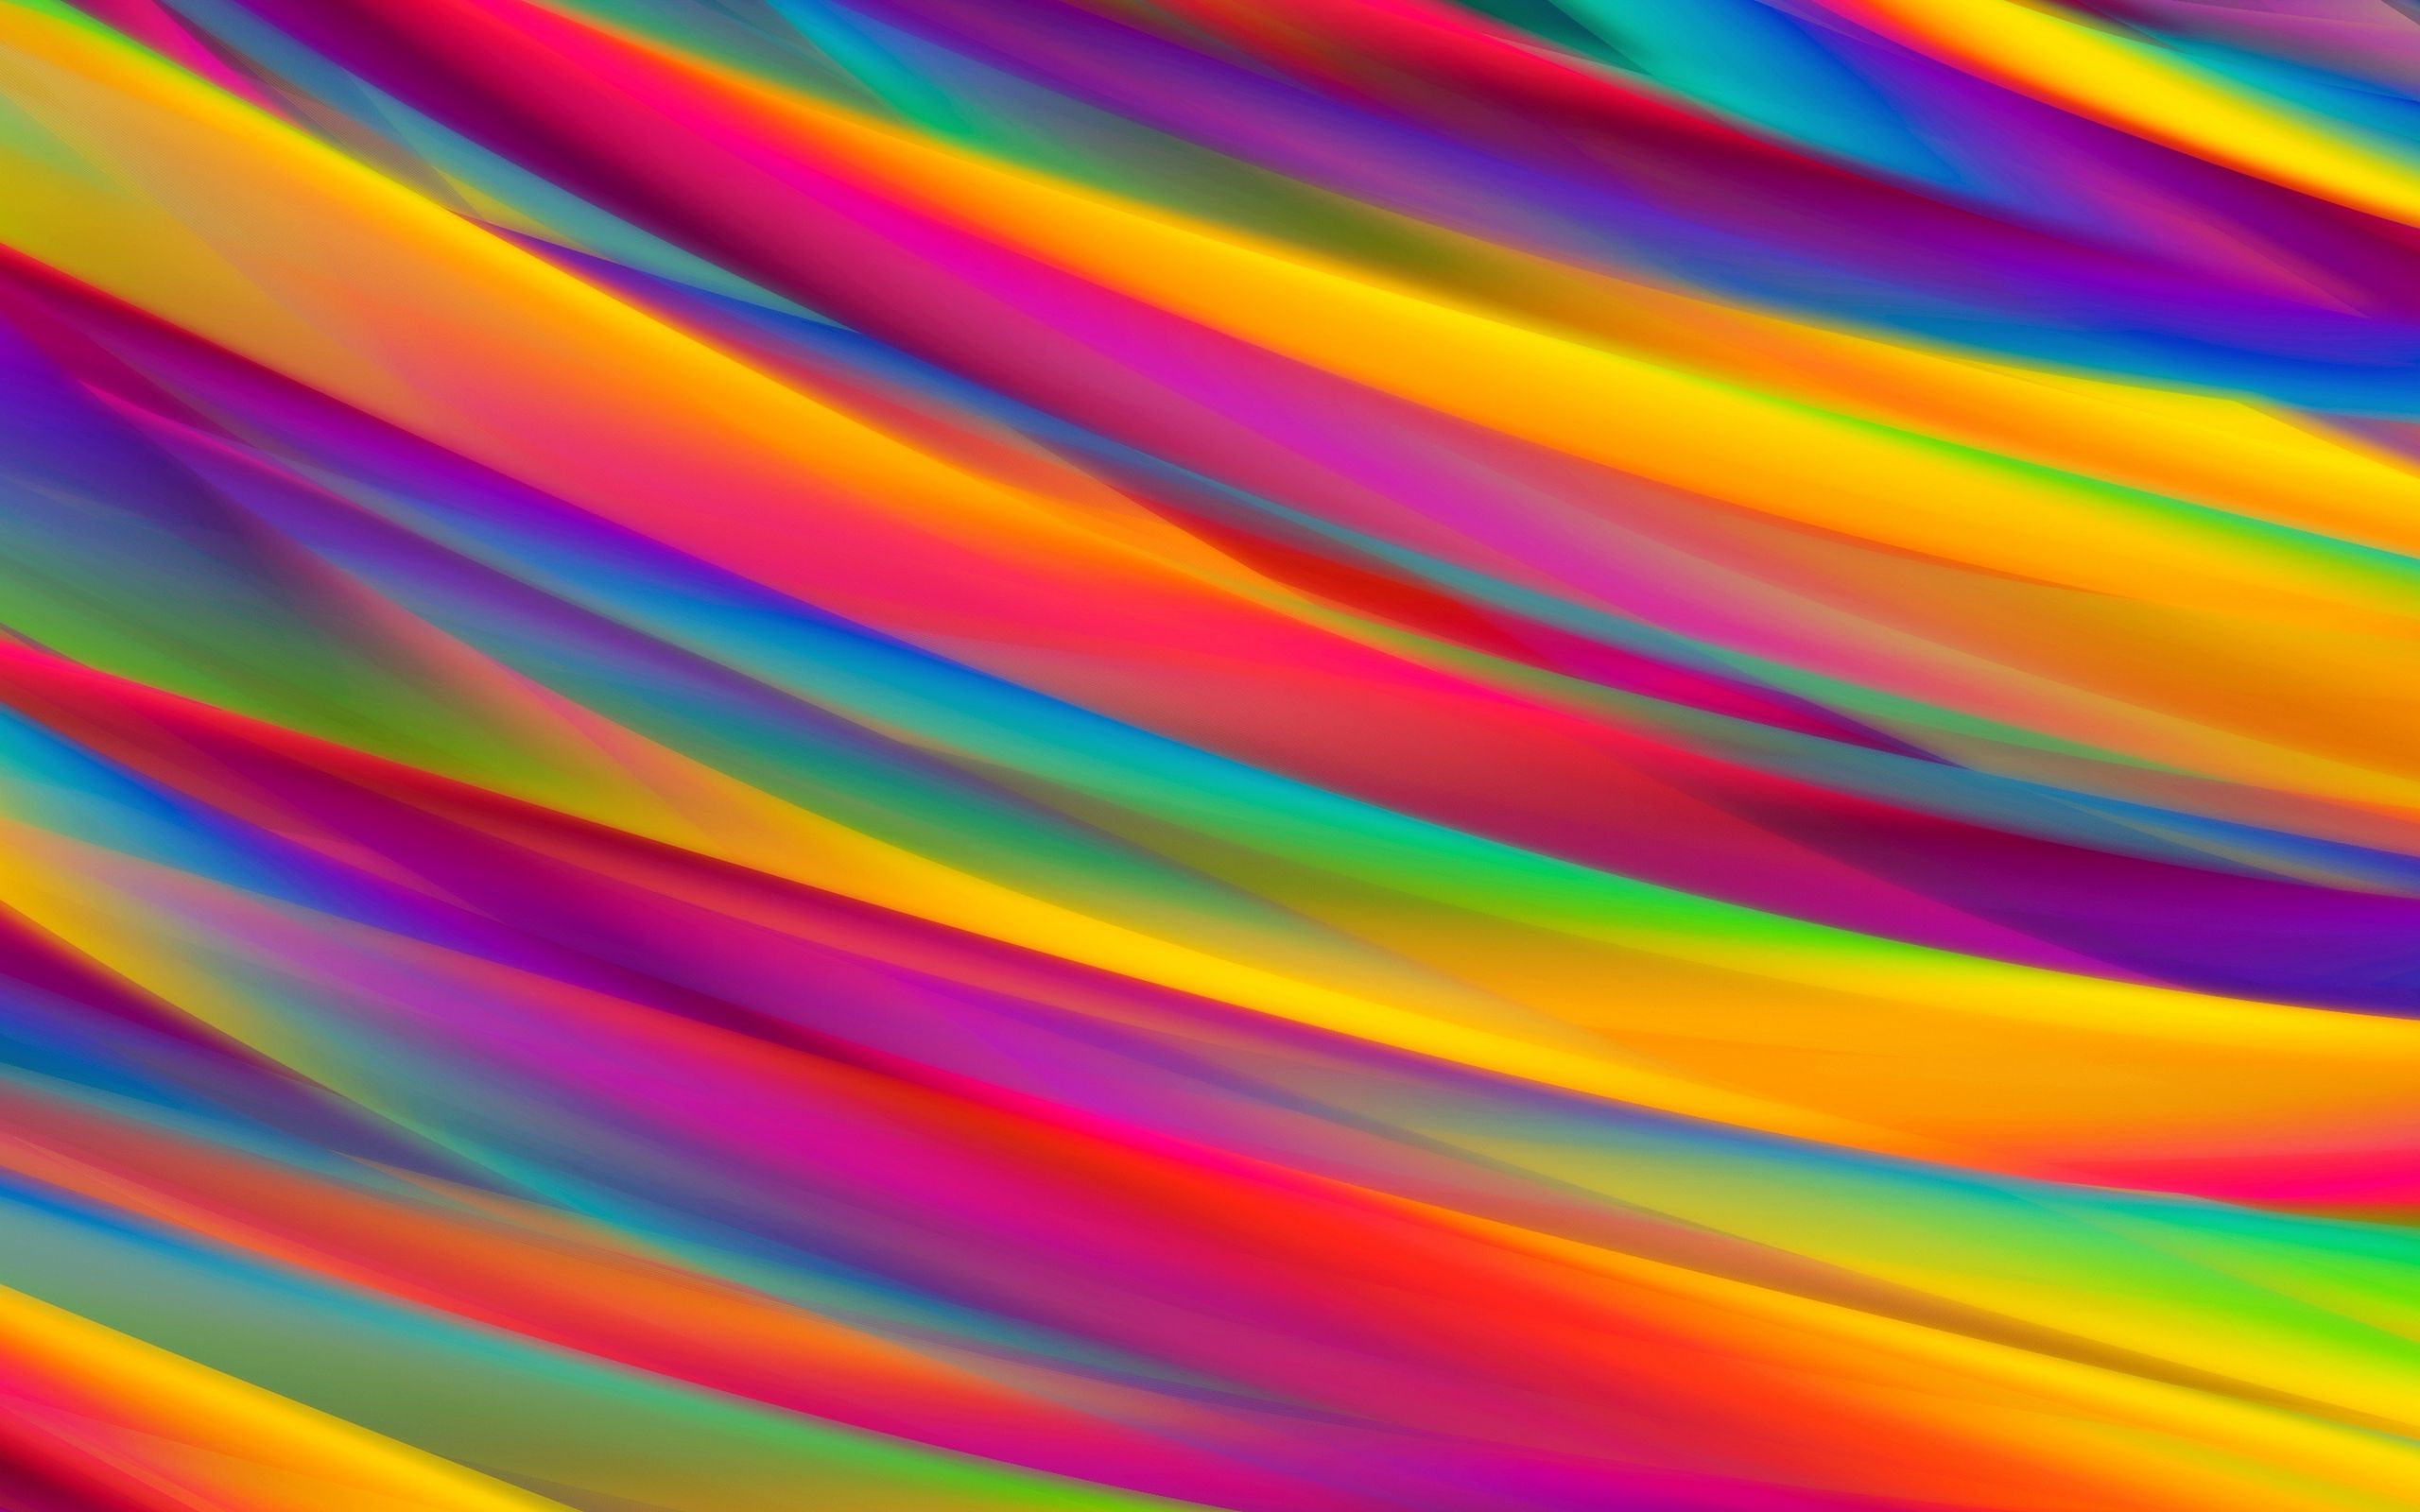 Download wallpaper multicolored waves, colorful waves, rainbow